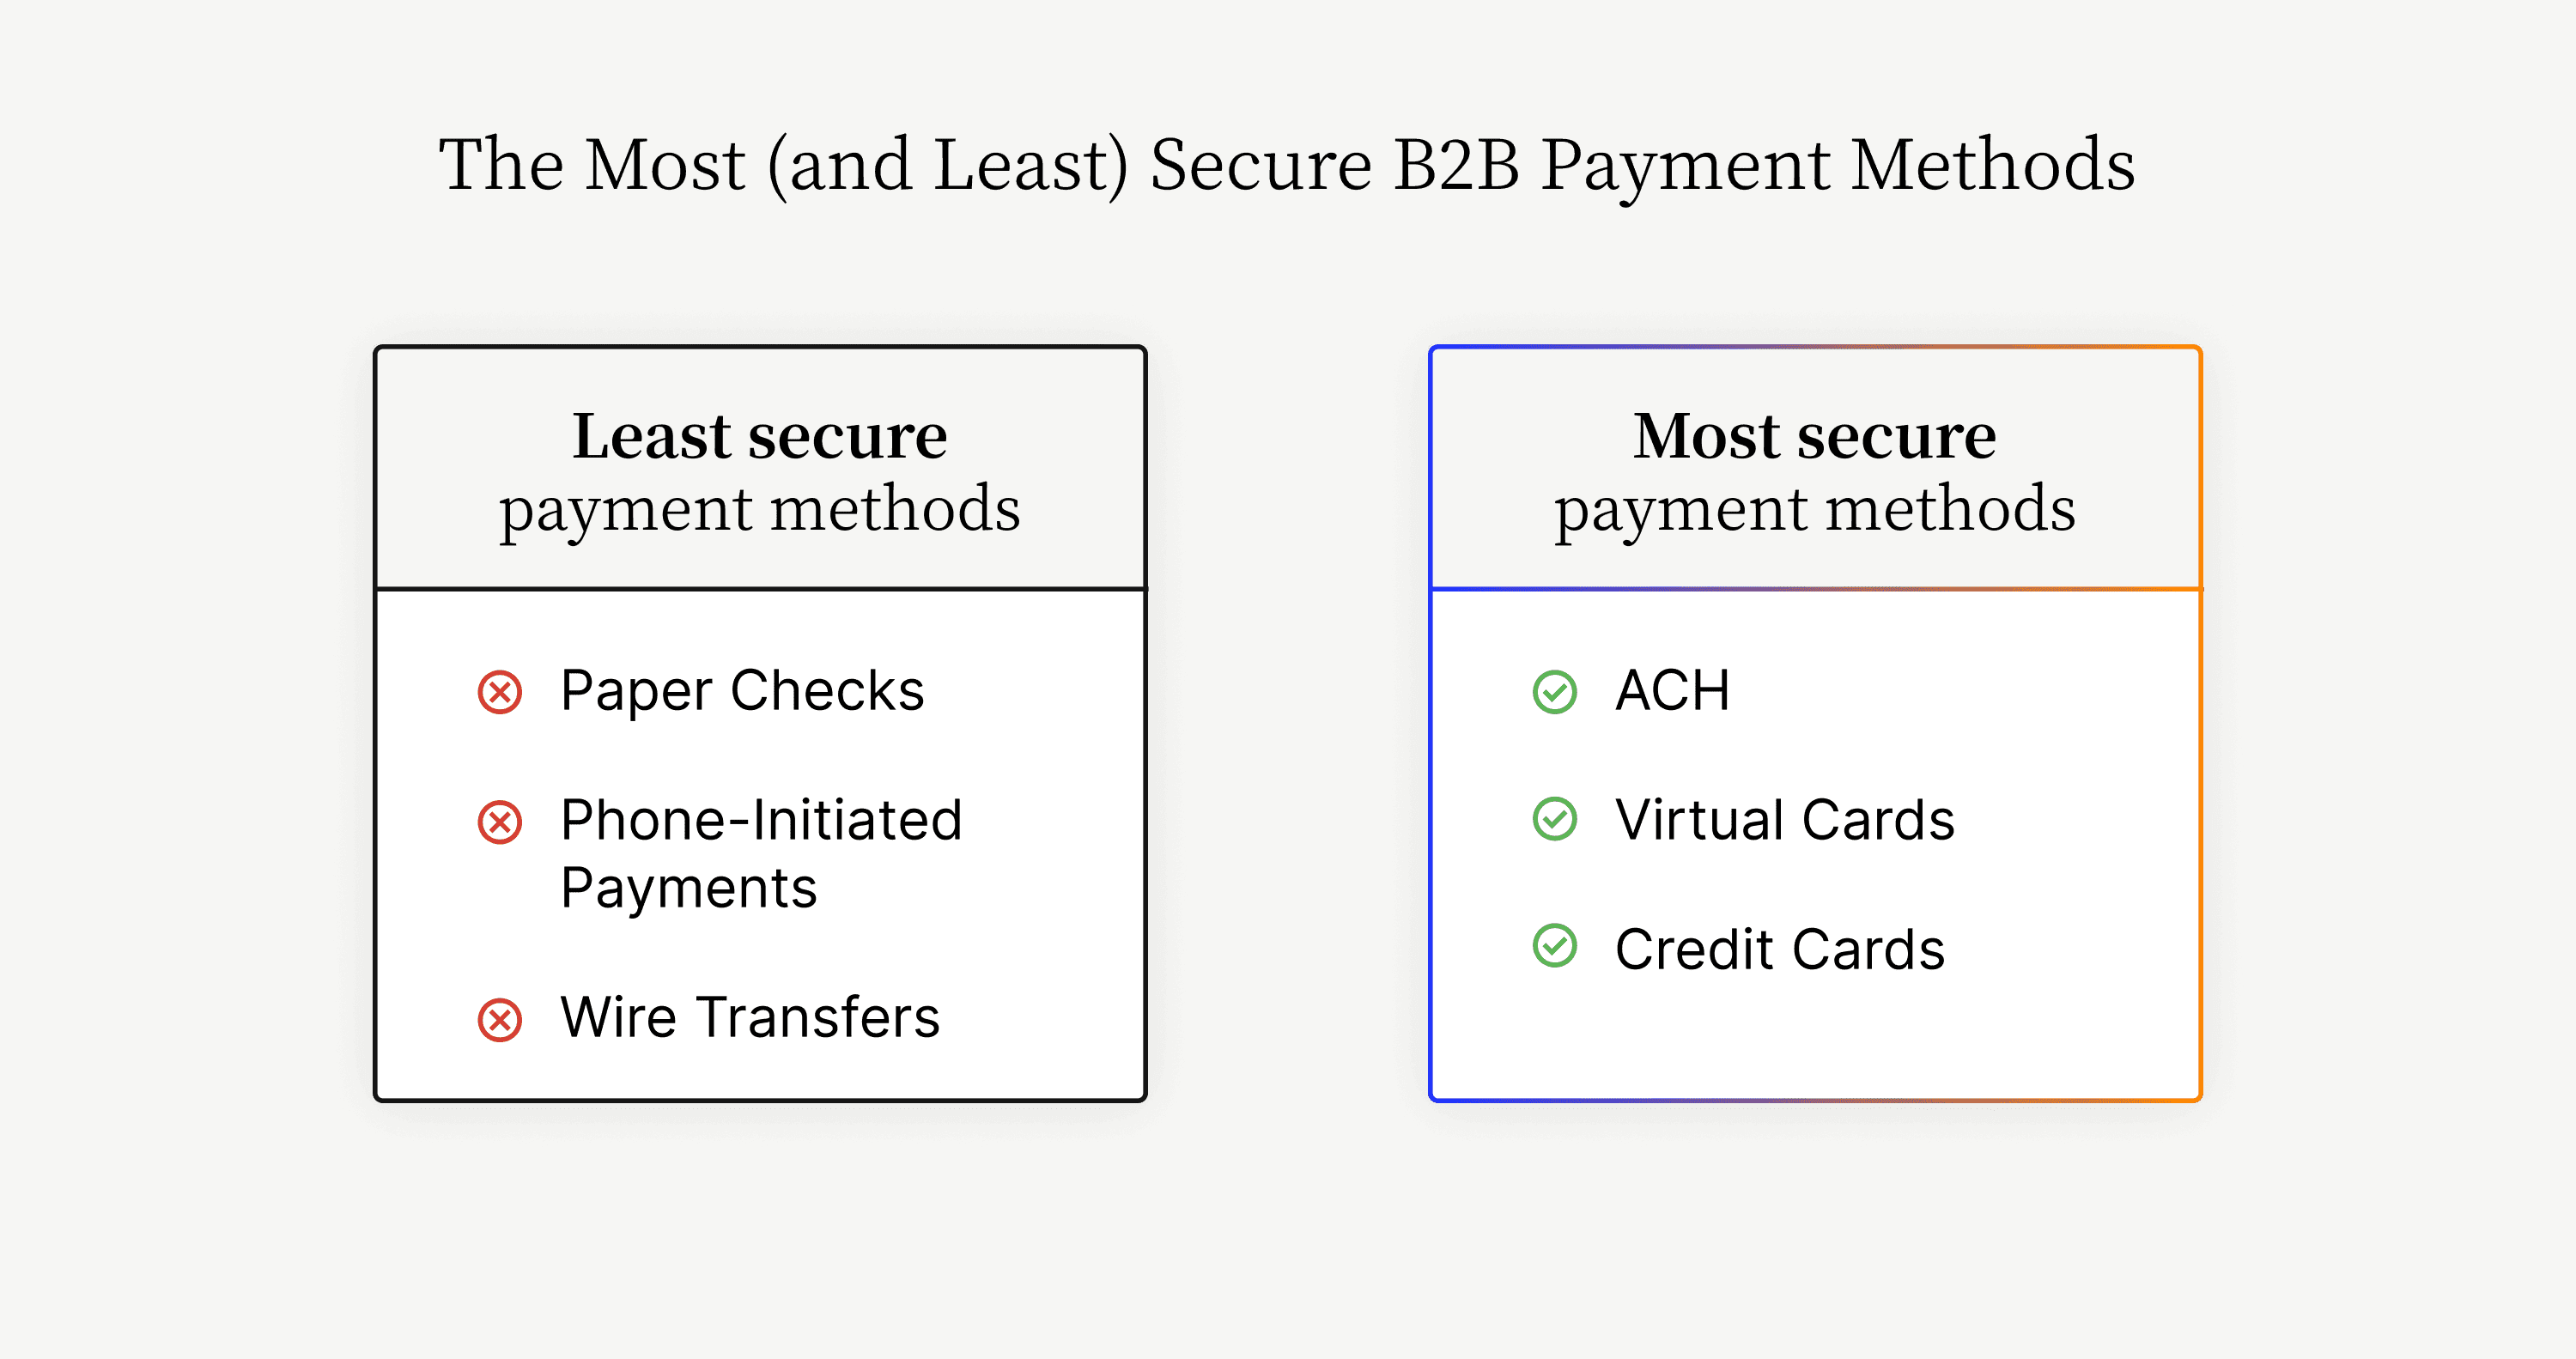 The most (and least) secure B2B payment methods